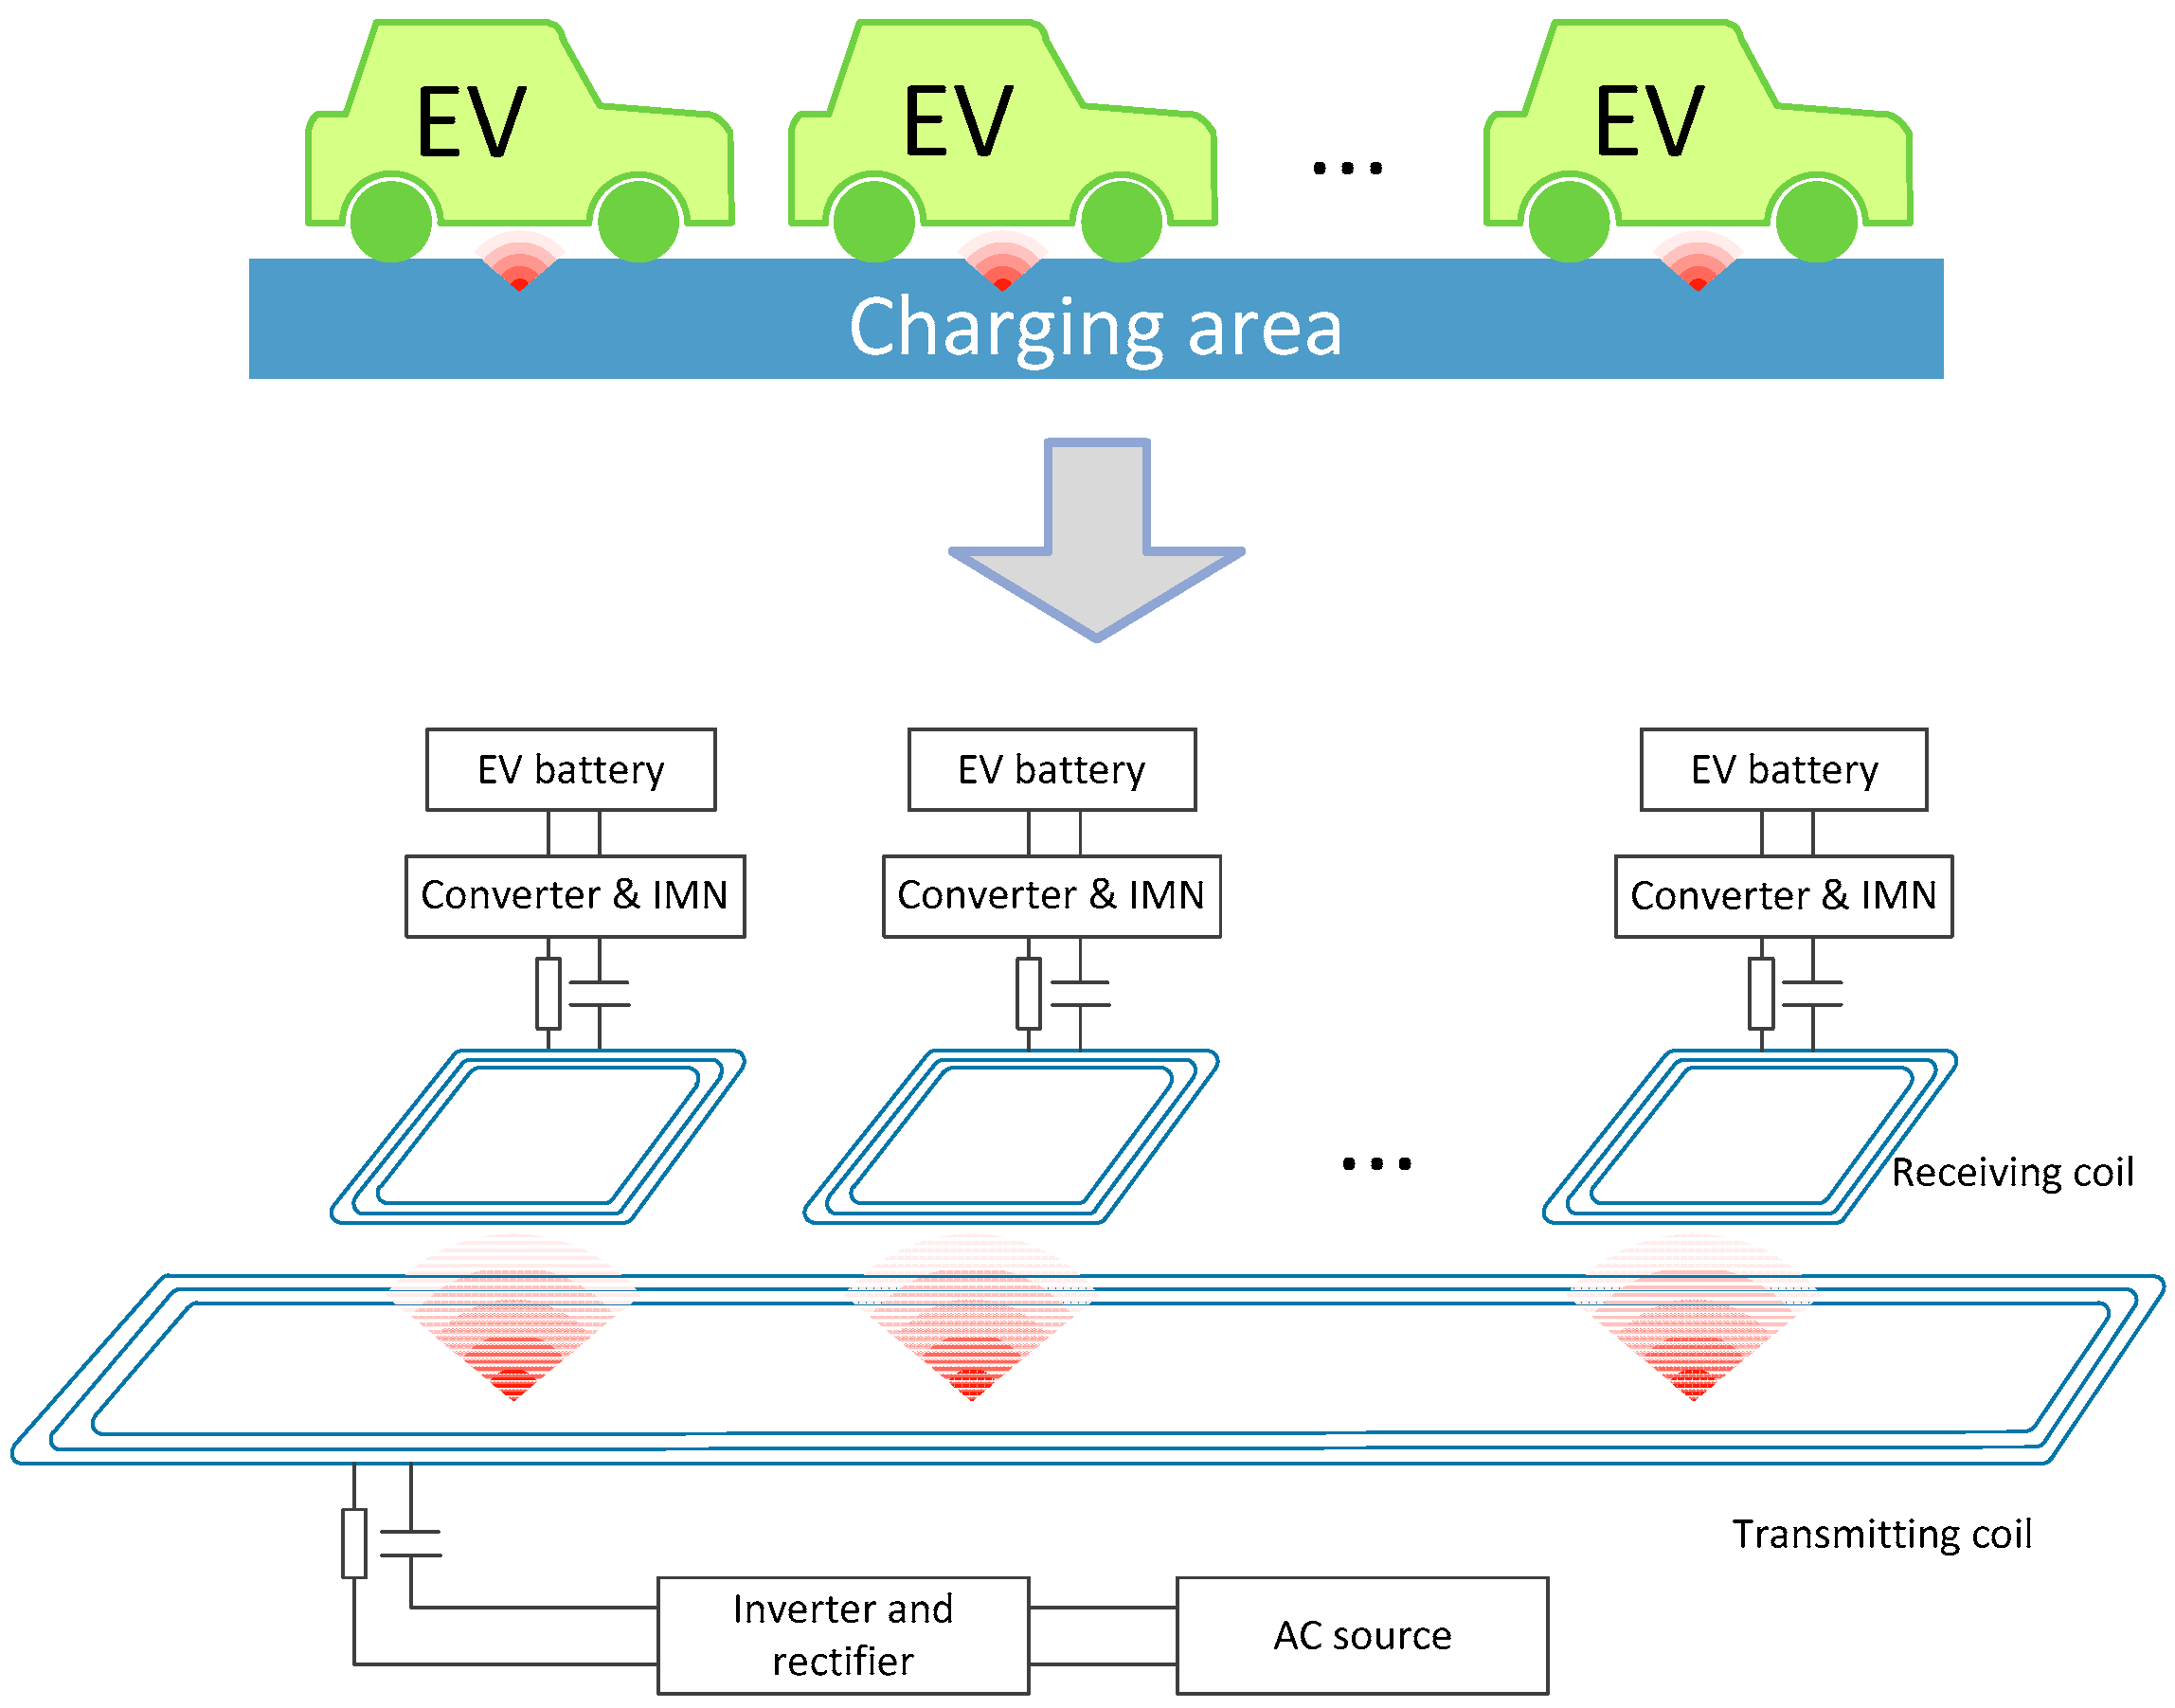 Energies Free FullText Research on an EV Dynamic Wireless Charging